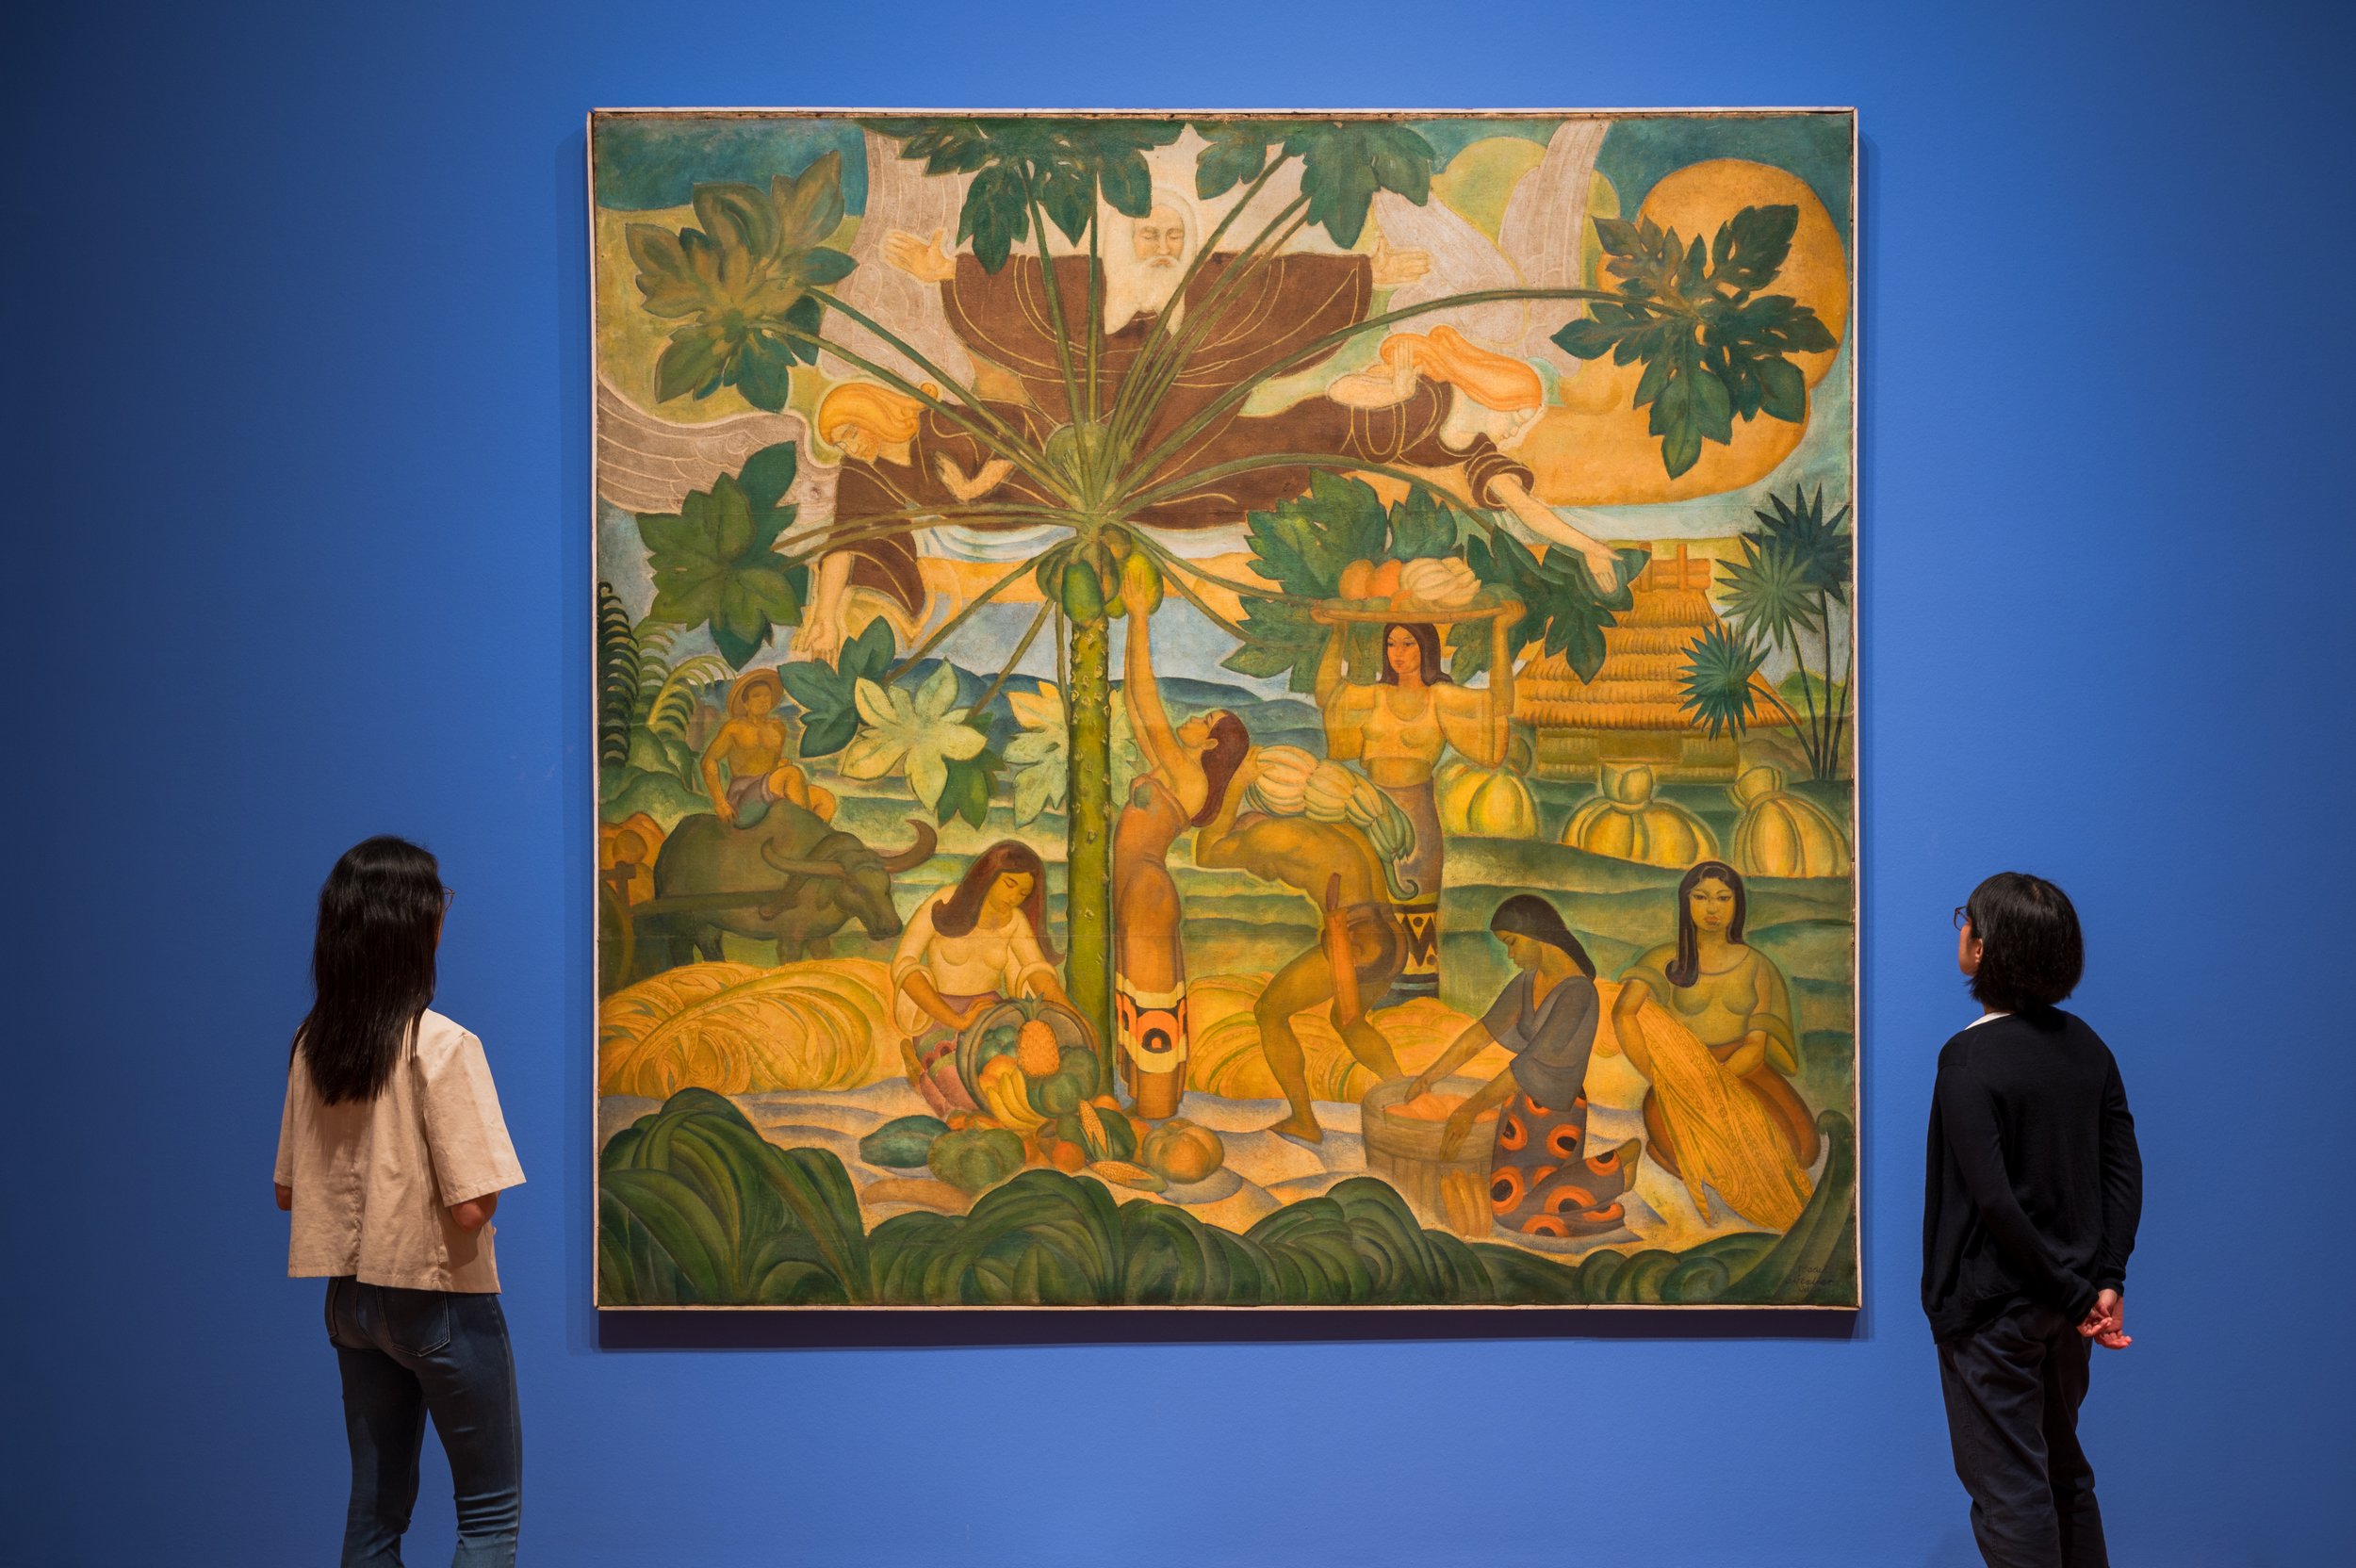  Victorio C. Edades, Galo B. Ocampo and Carlos “Botong” Francisco. Mother Nature’s Bounty Harvest. 1935. Oil on canvas, 257.5 x 273 cm. Private collection. © Armin Christopher E. Cuadra. Installation view, Tropical: Stories from Southeast Asia and La